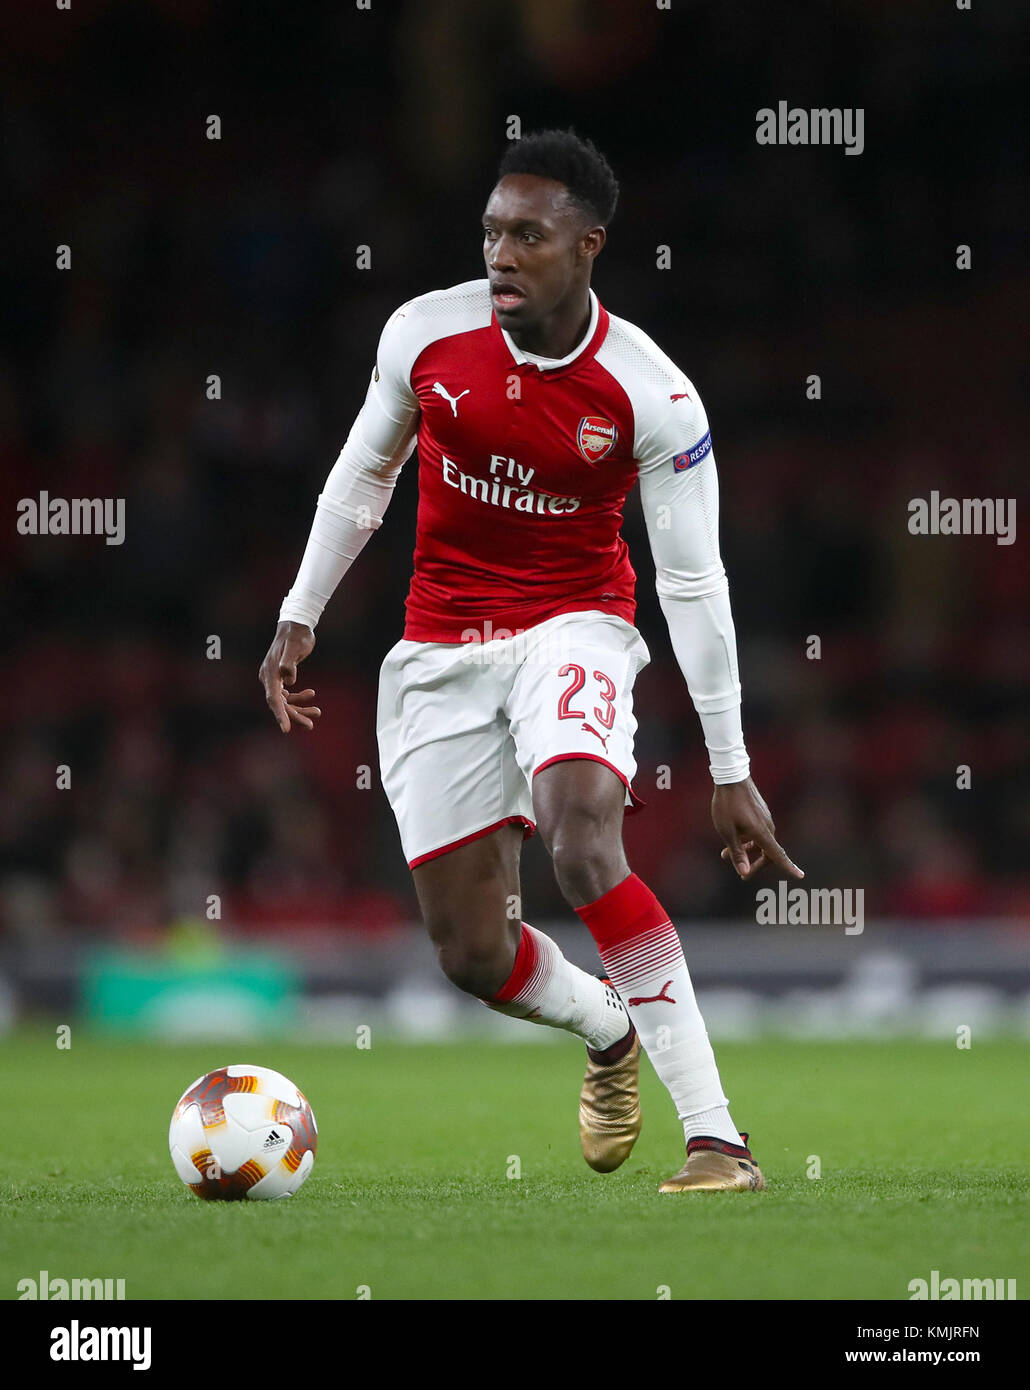 Arsenal's Danny Welbeck during the UEFA Europa League, Group H match at the Emirates Stadium, London. PRESS ASSOCIATION Photo. Picture date: Thursday December 7, 2017. See PA story SOCCER Arsenal. Photo credit should read: Nick Potts/PA Wire Stock Photo